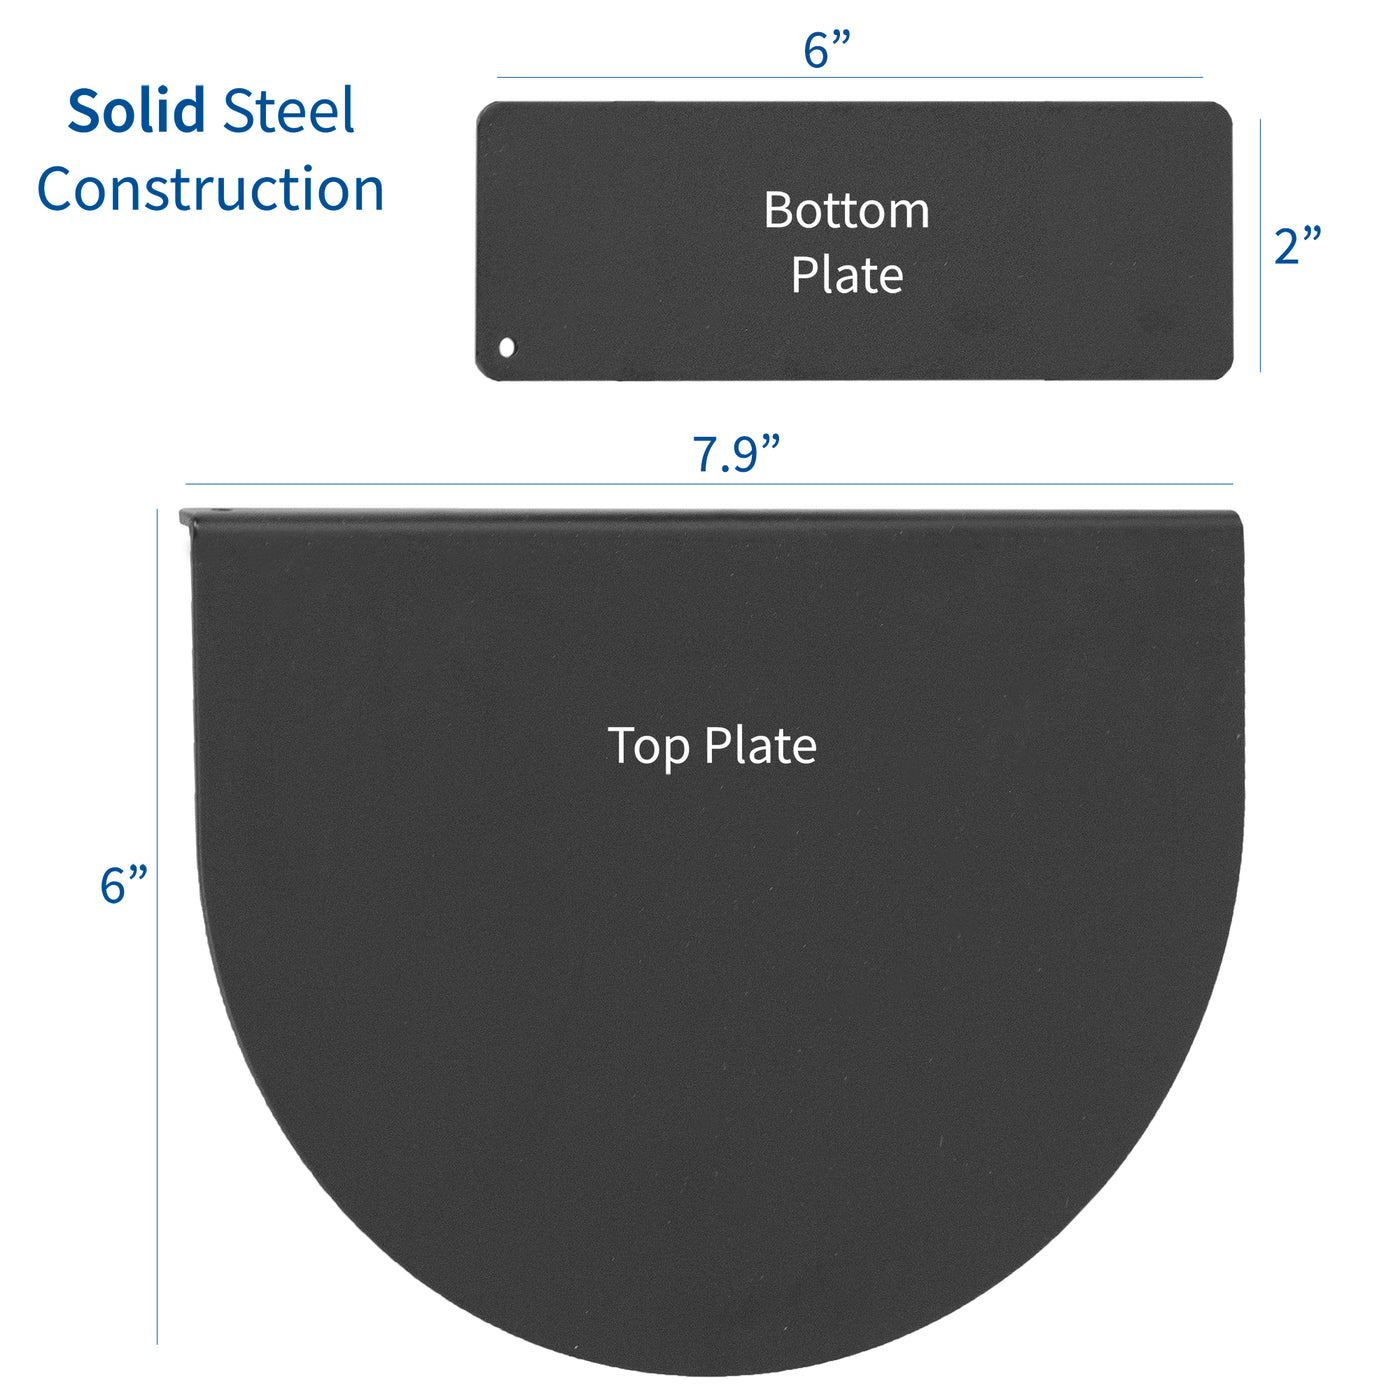 Solid steel bottom and top plate for even weight dispersion.